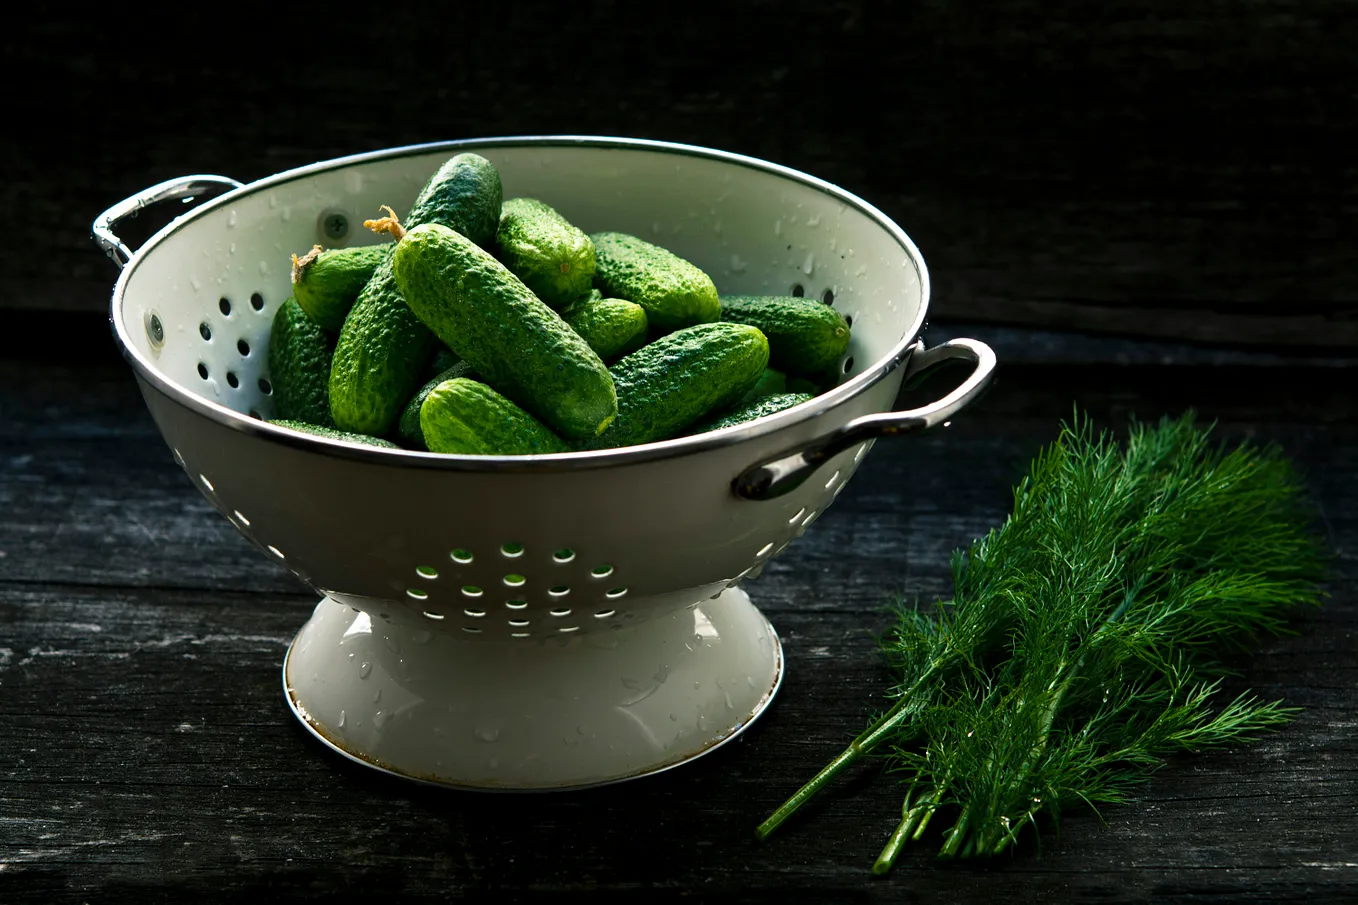 A metal colander on a black surface with a black background. Inside, a pile of small, bright green cucumbers, next to it, a dark green bunch of fennel.